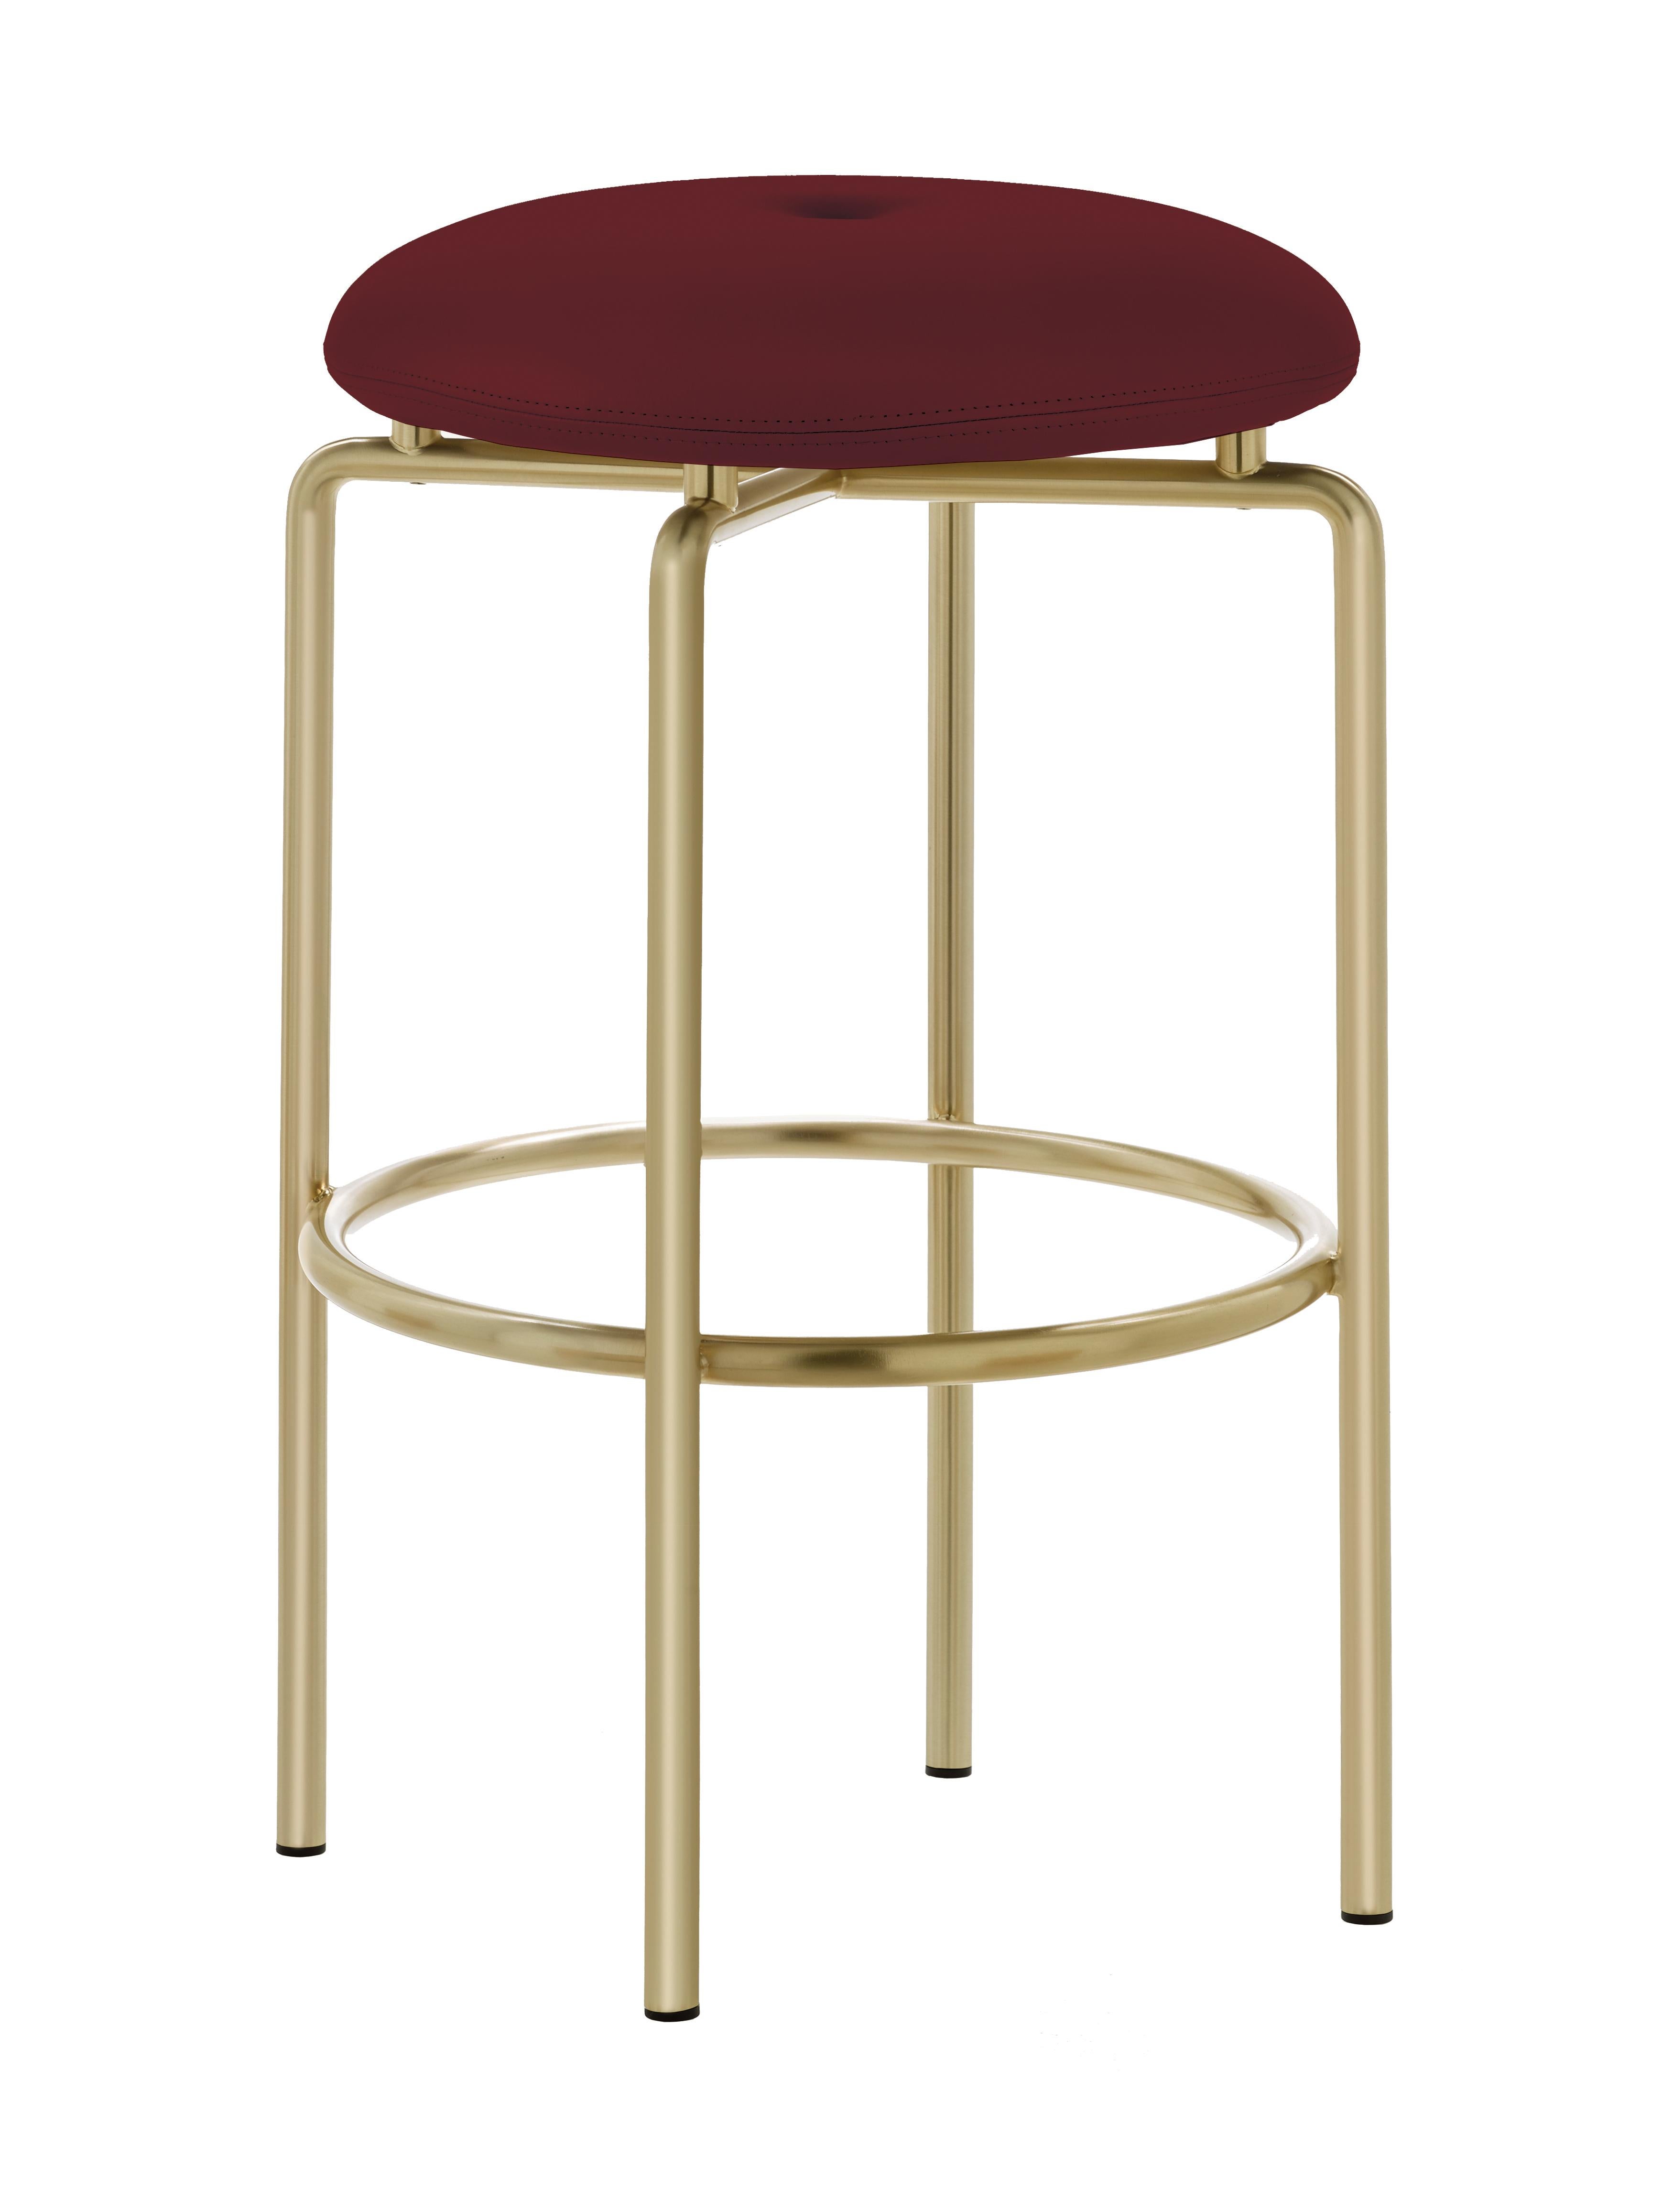 For Sale: Red (Elegant 95947 Oxblood) Circular Counter Stool in Satin Brass and Leather Designed by Craig Bassam